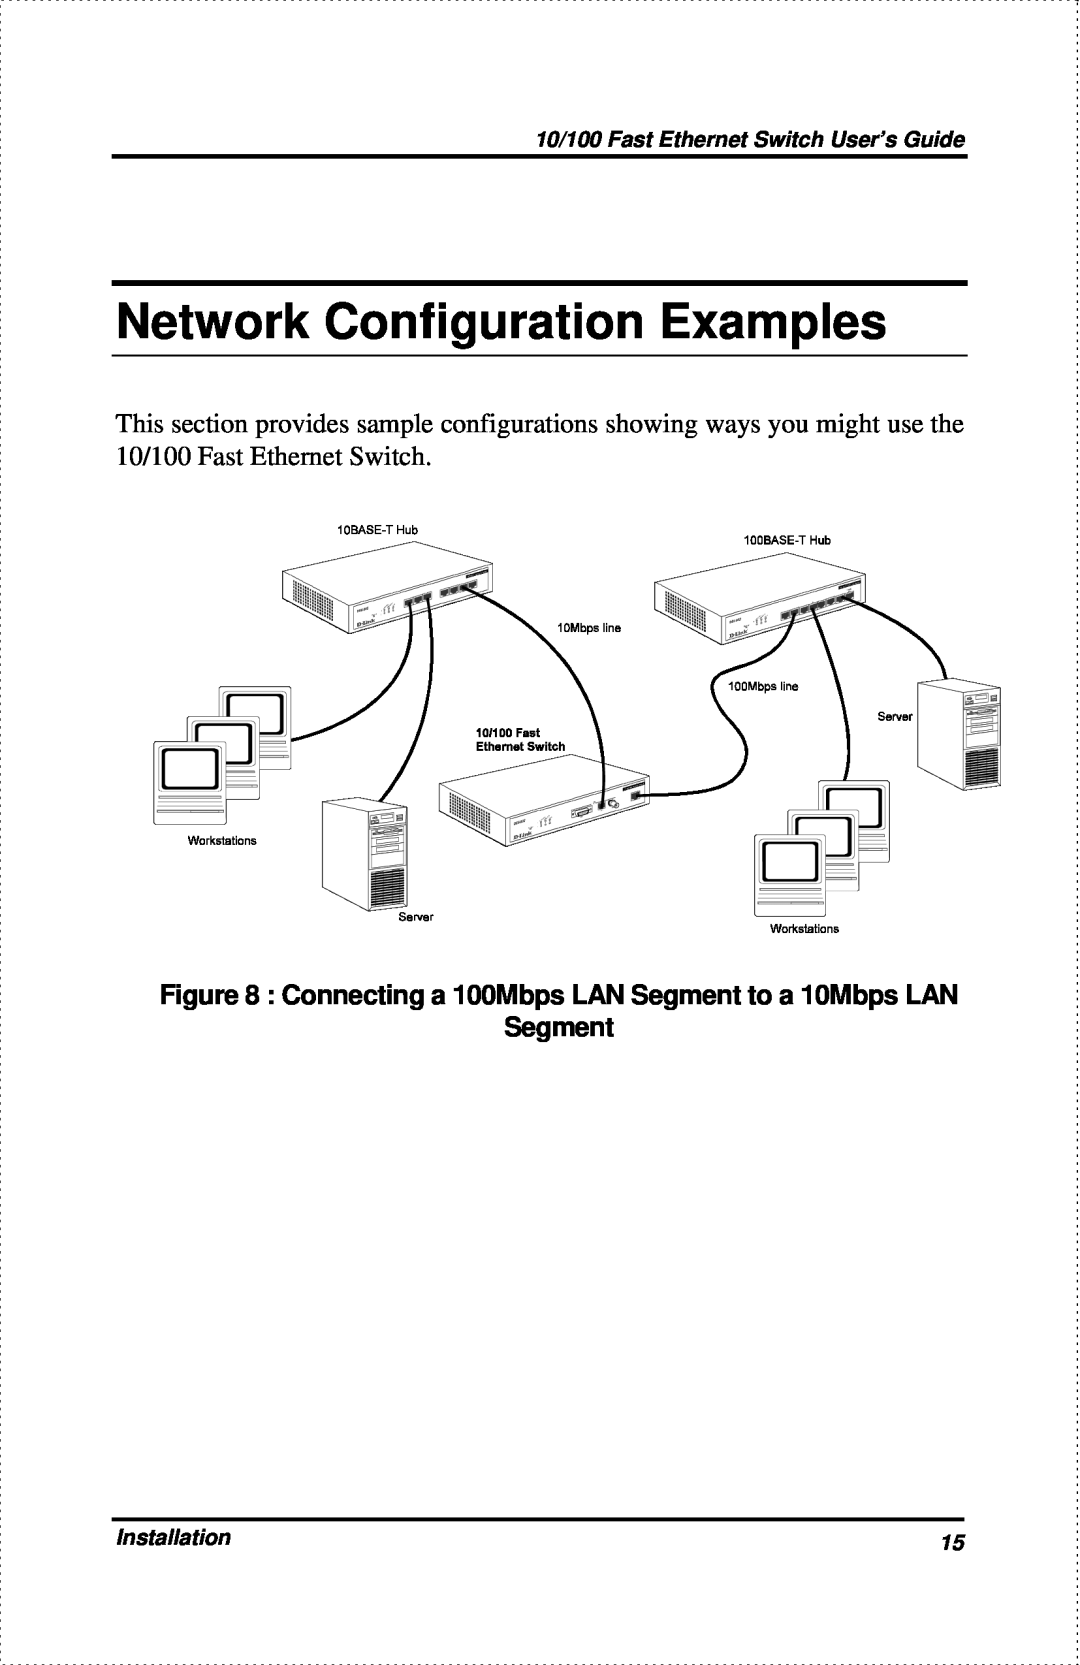 D-Link DES-802 Network Configuration Examples, Connecting a 100Mbps LAN Segment to a 10Mbps LAN Segment, Installation 